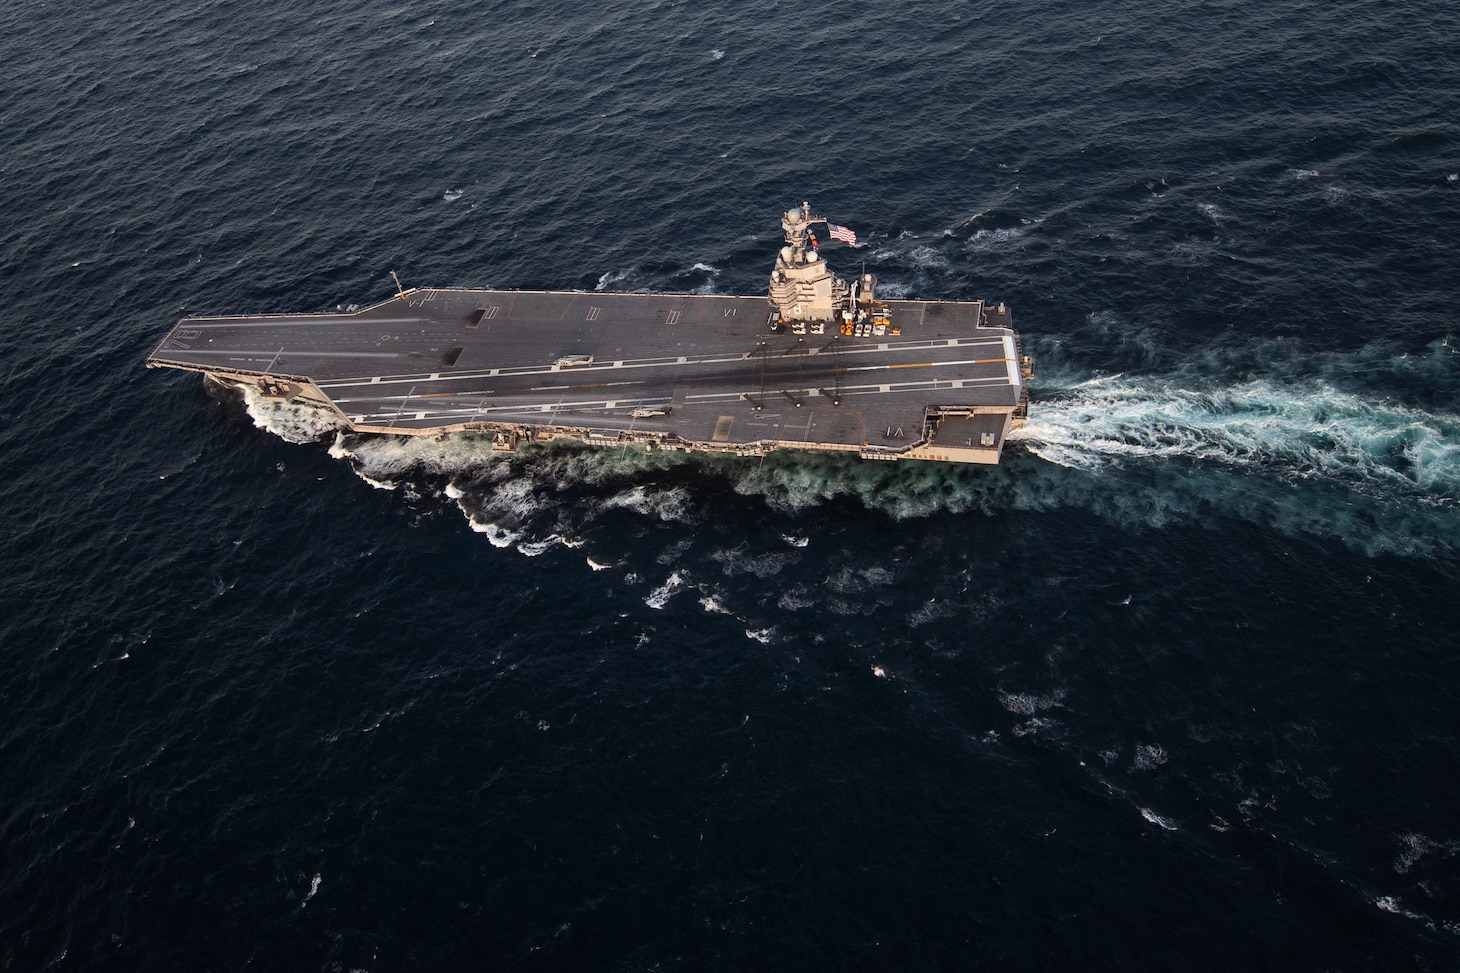 USS Gerald R. Ford (CVN 78) and the Italian aircraft carrier ITS Cavour (CVH 550) transit the Atlantic Ocean, marking the first time a Ford-class and Italian carrier have operated together underway.